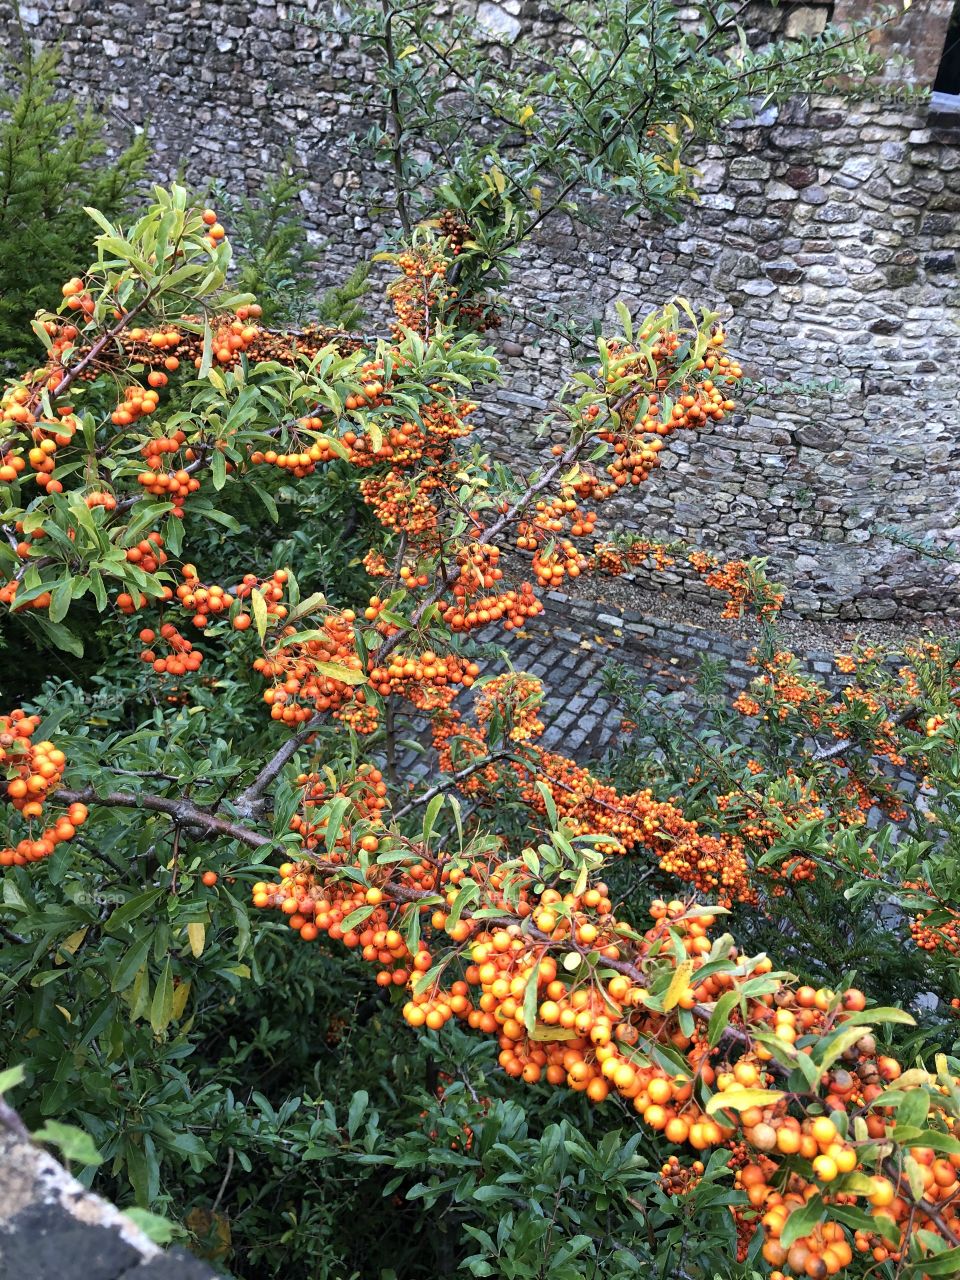 Some pretty impressive autumnal berries, found in the parish church of Ottery St Mary.